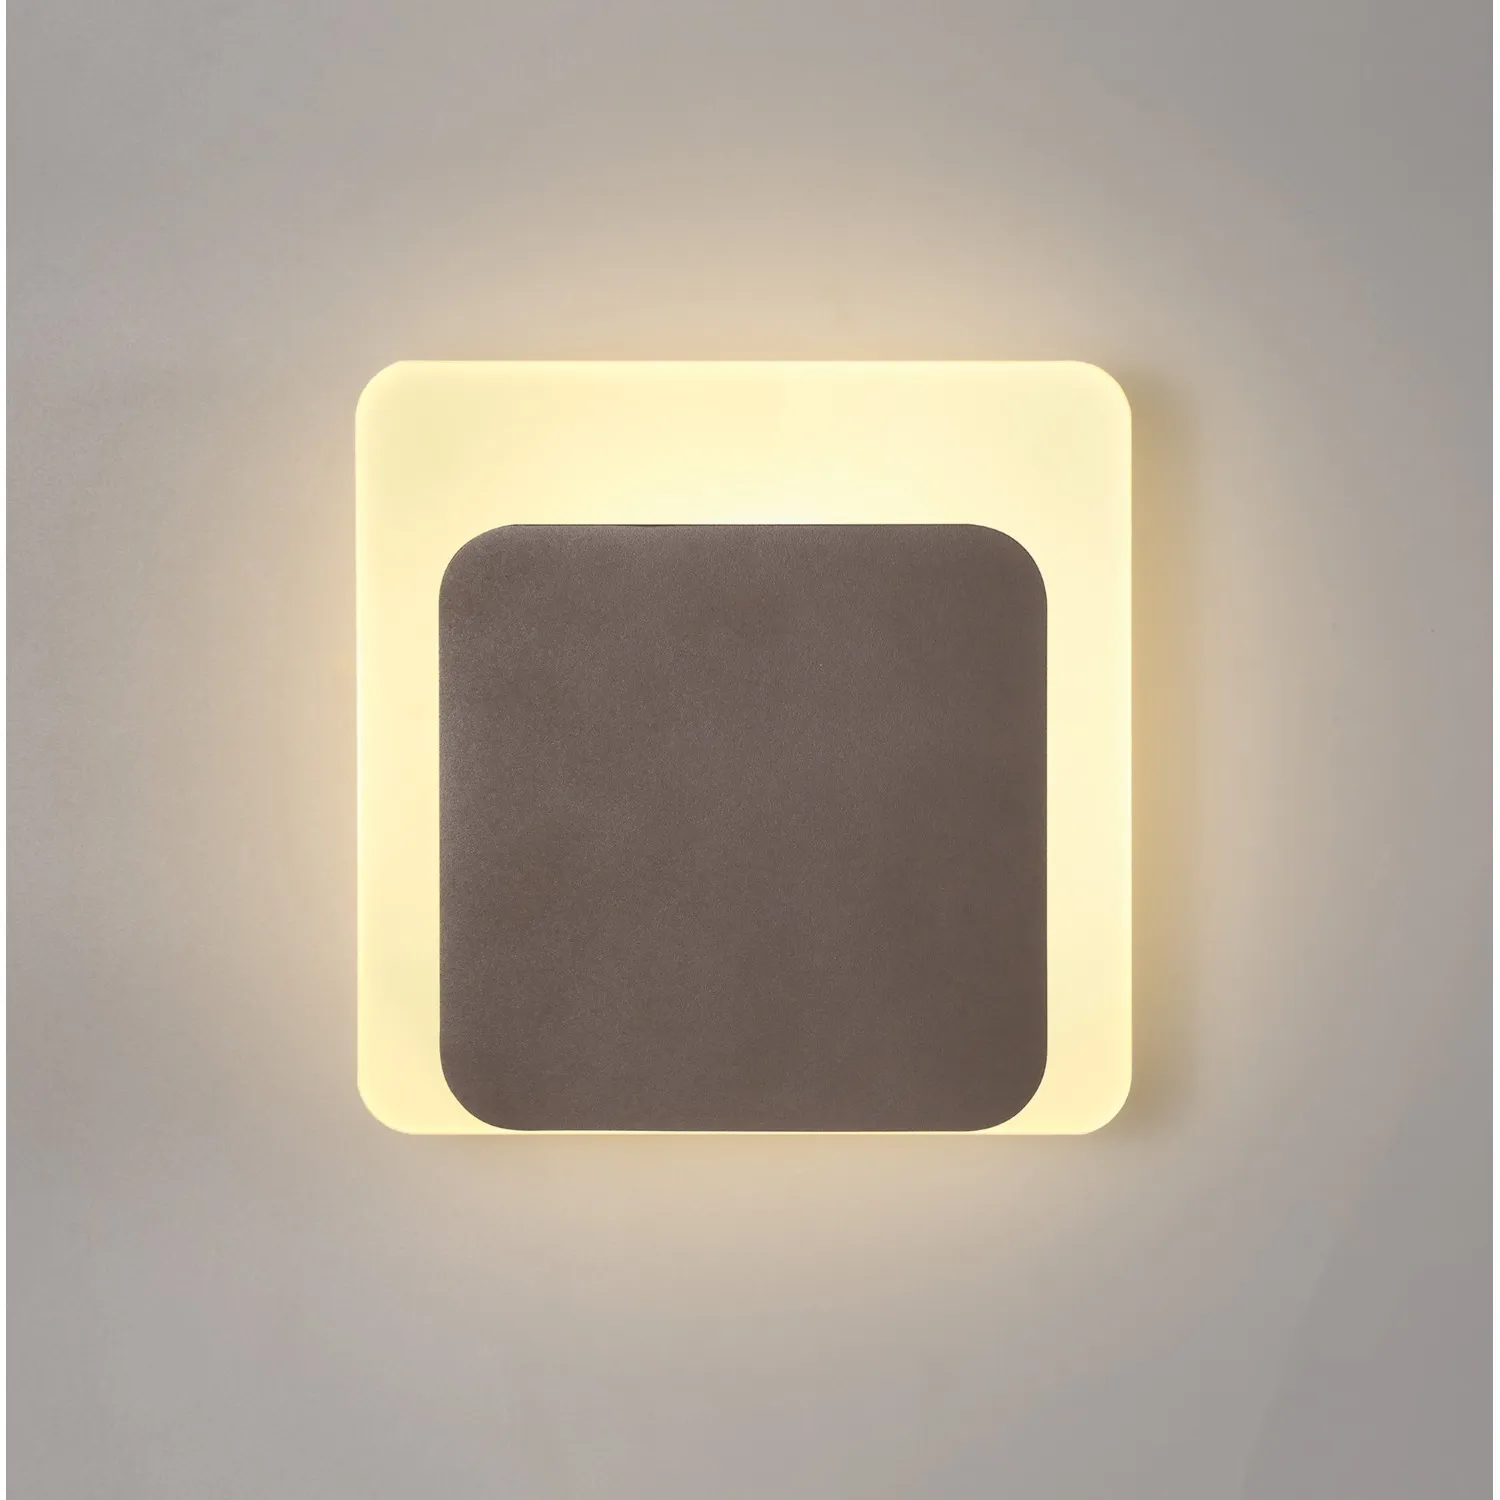 Edgware Magnetic Base Wall Lamp, 12W LED 3000K 498lm, 15 19cm Square Bottom Offset, Coffee Acrylic Frosted Diffuser